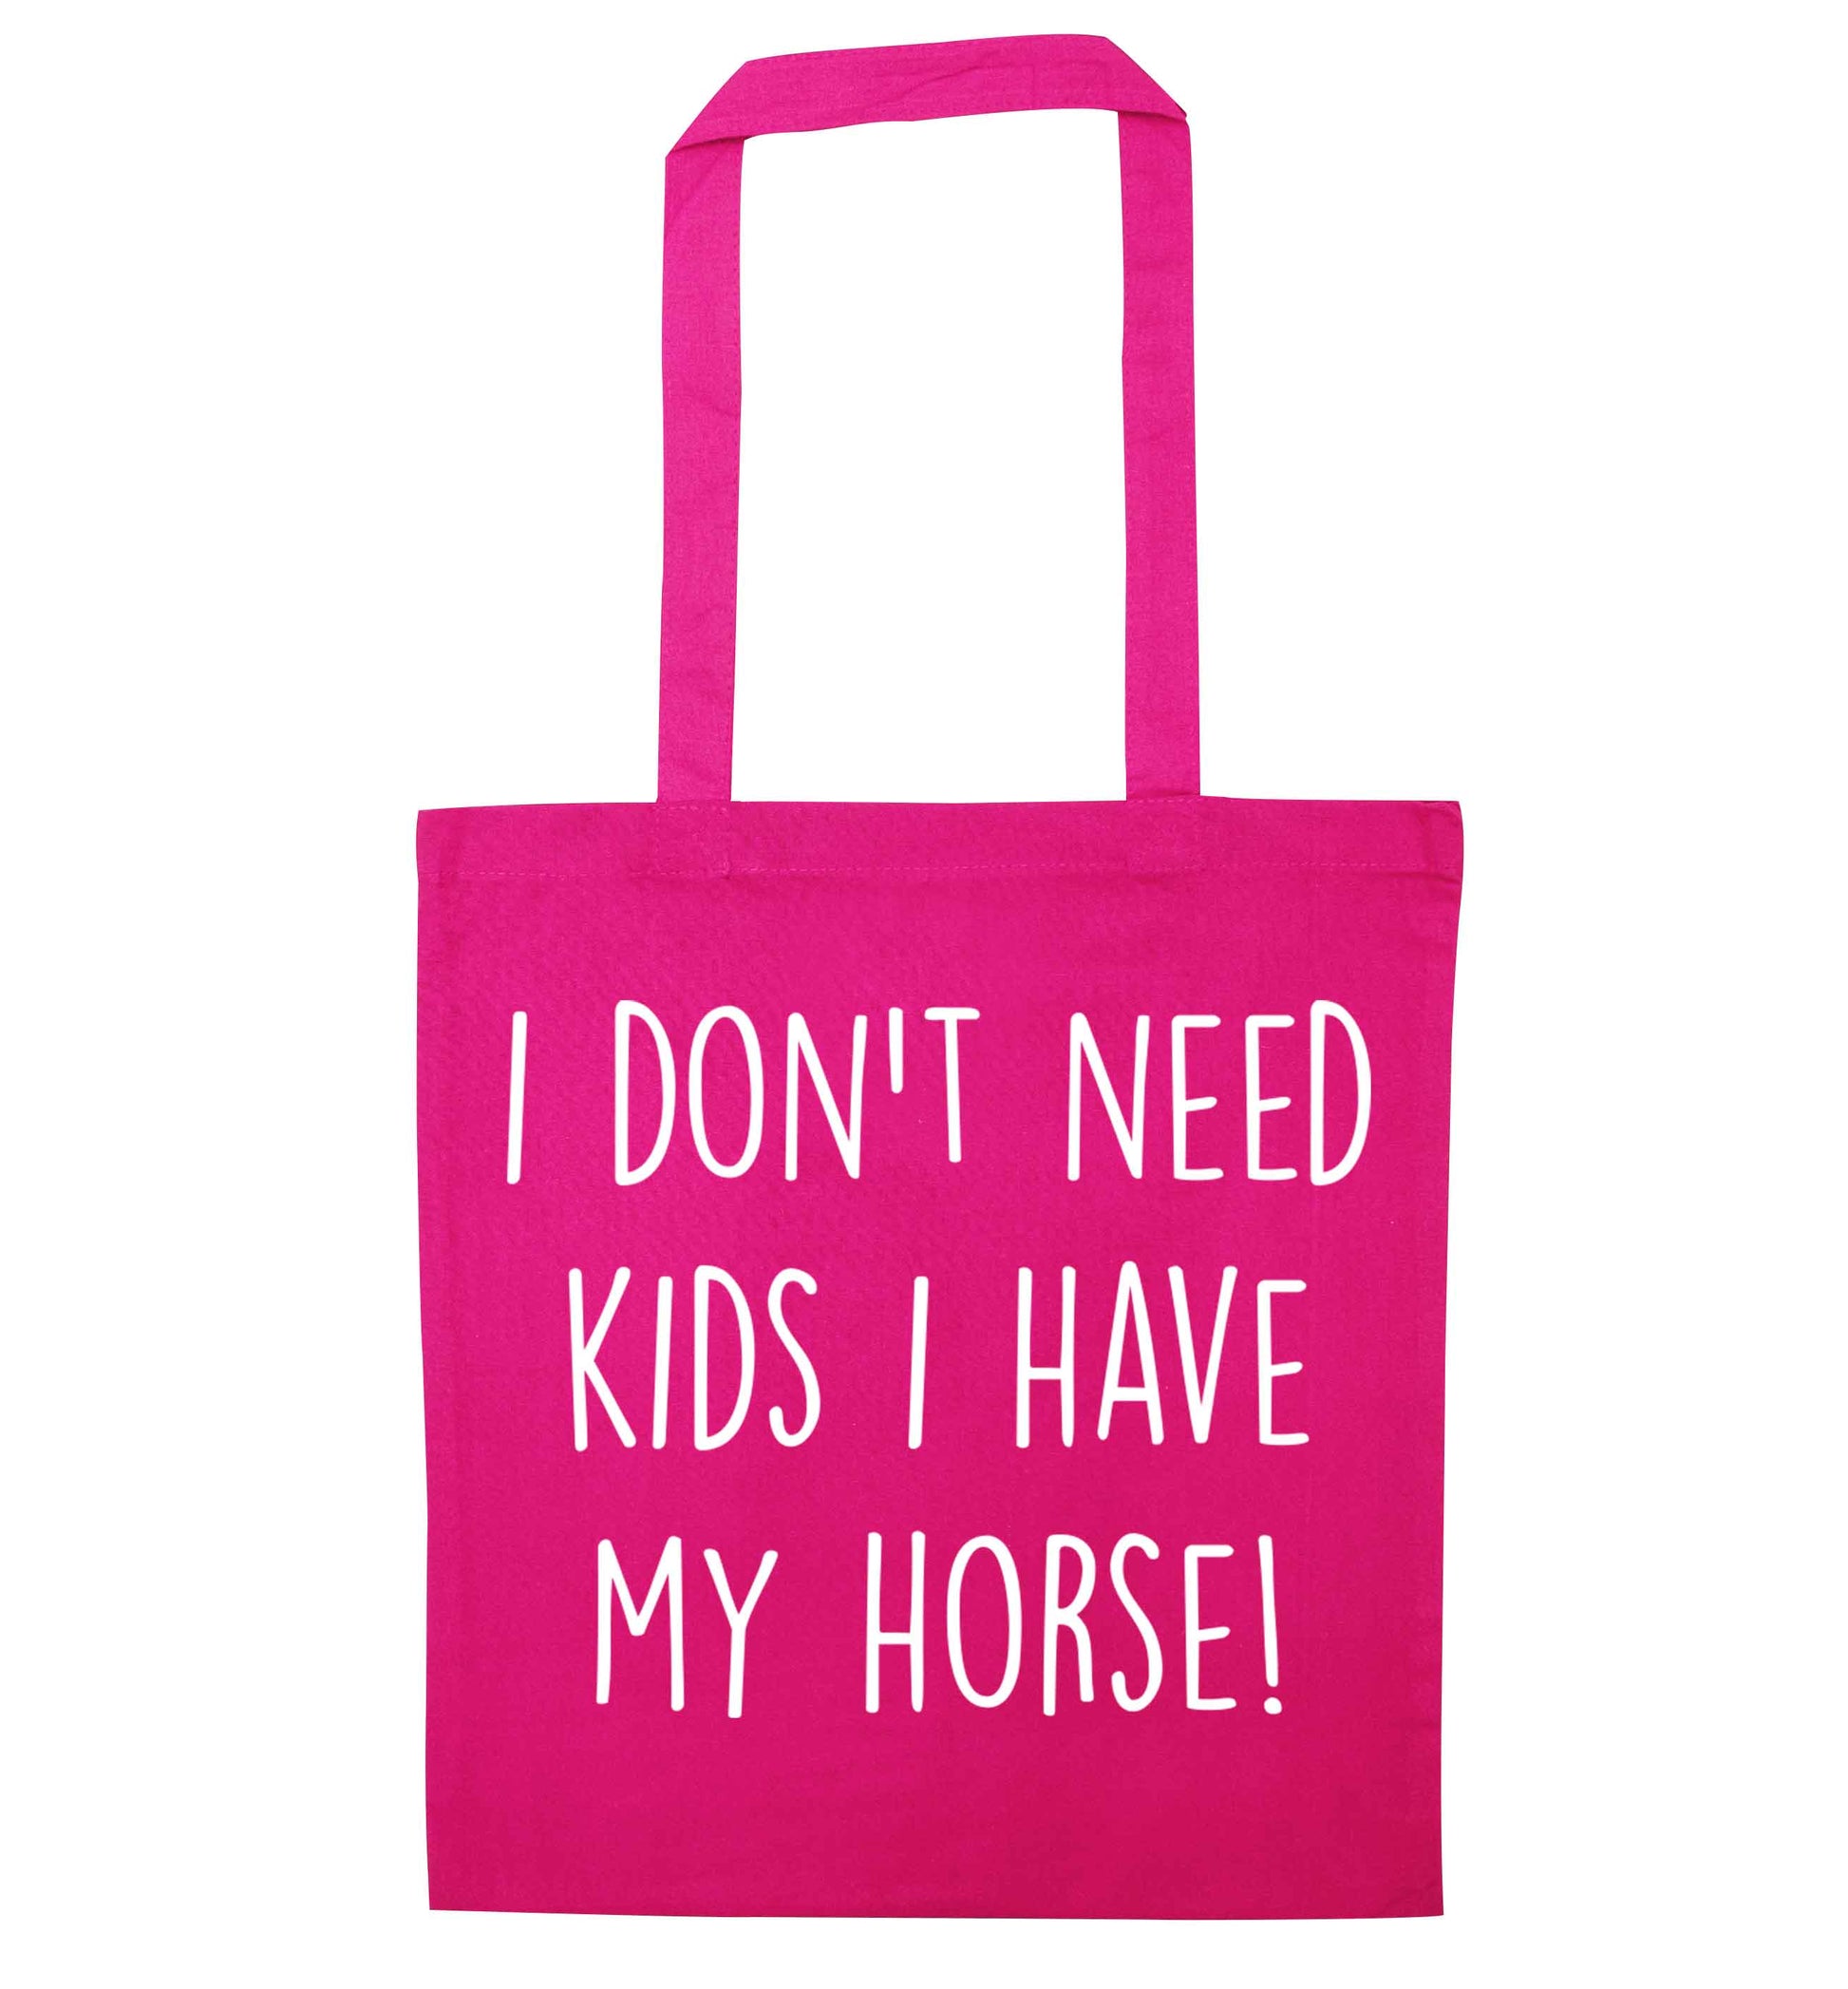 I don't need kids I have my horse pink tote bag